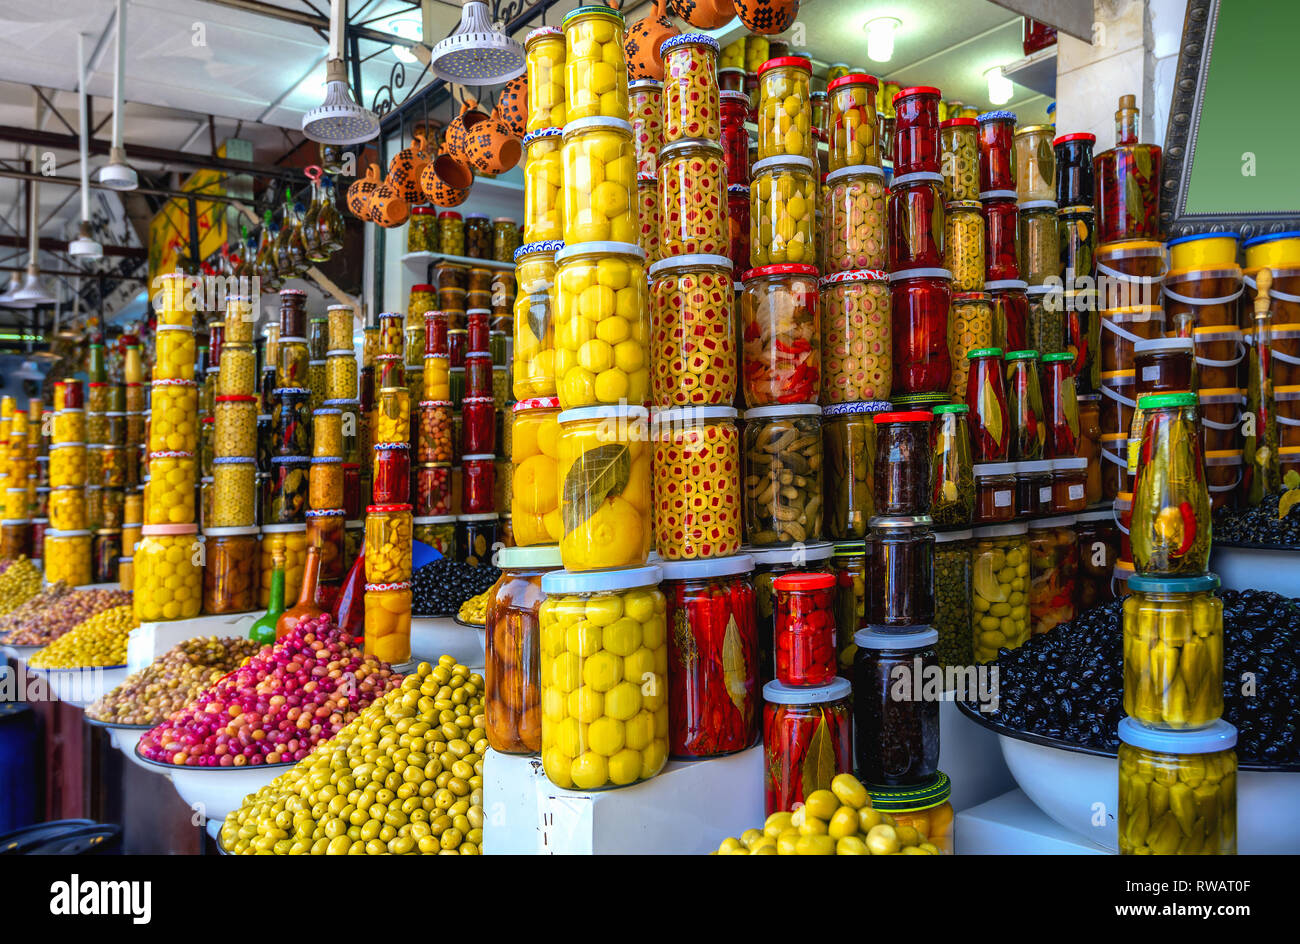 Colorful stall for sale with olives, preserves, sauces, canned goods, spices at market in Jamaa el Fna in Marrakesh.  Morocco, North Africa Stock Photo